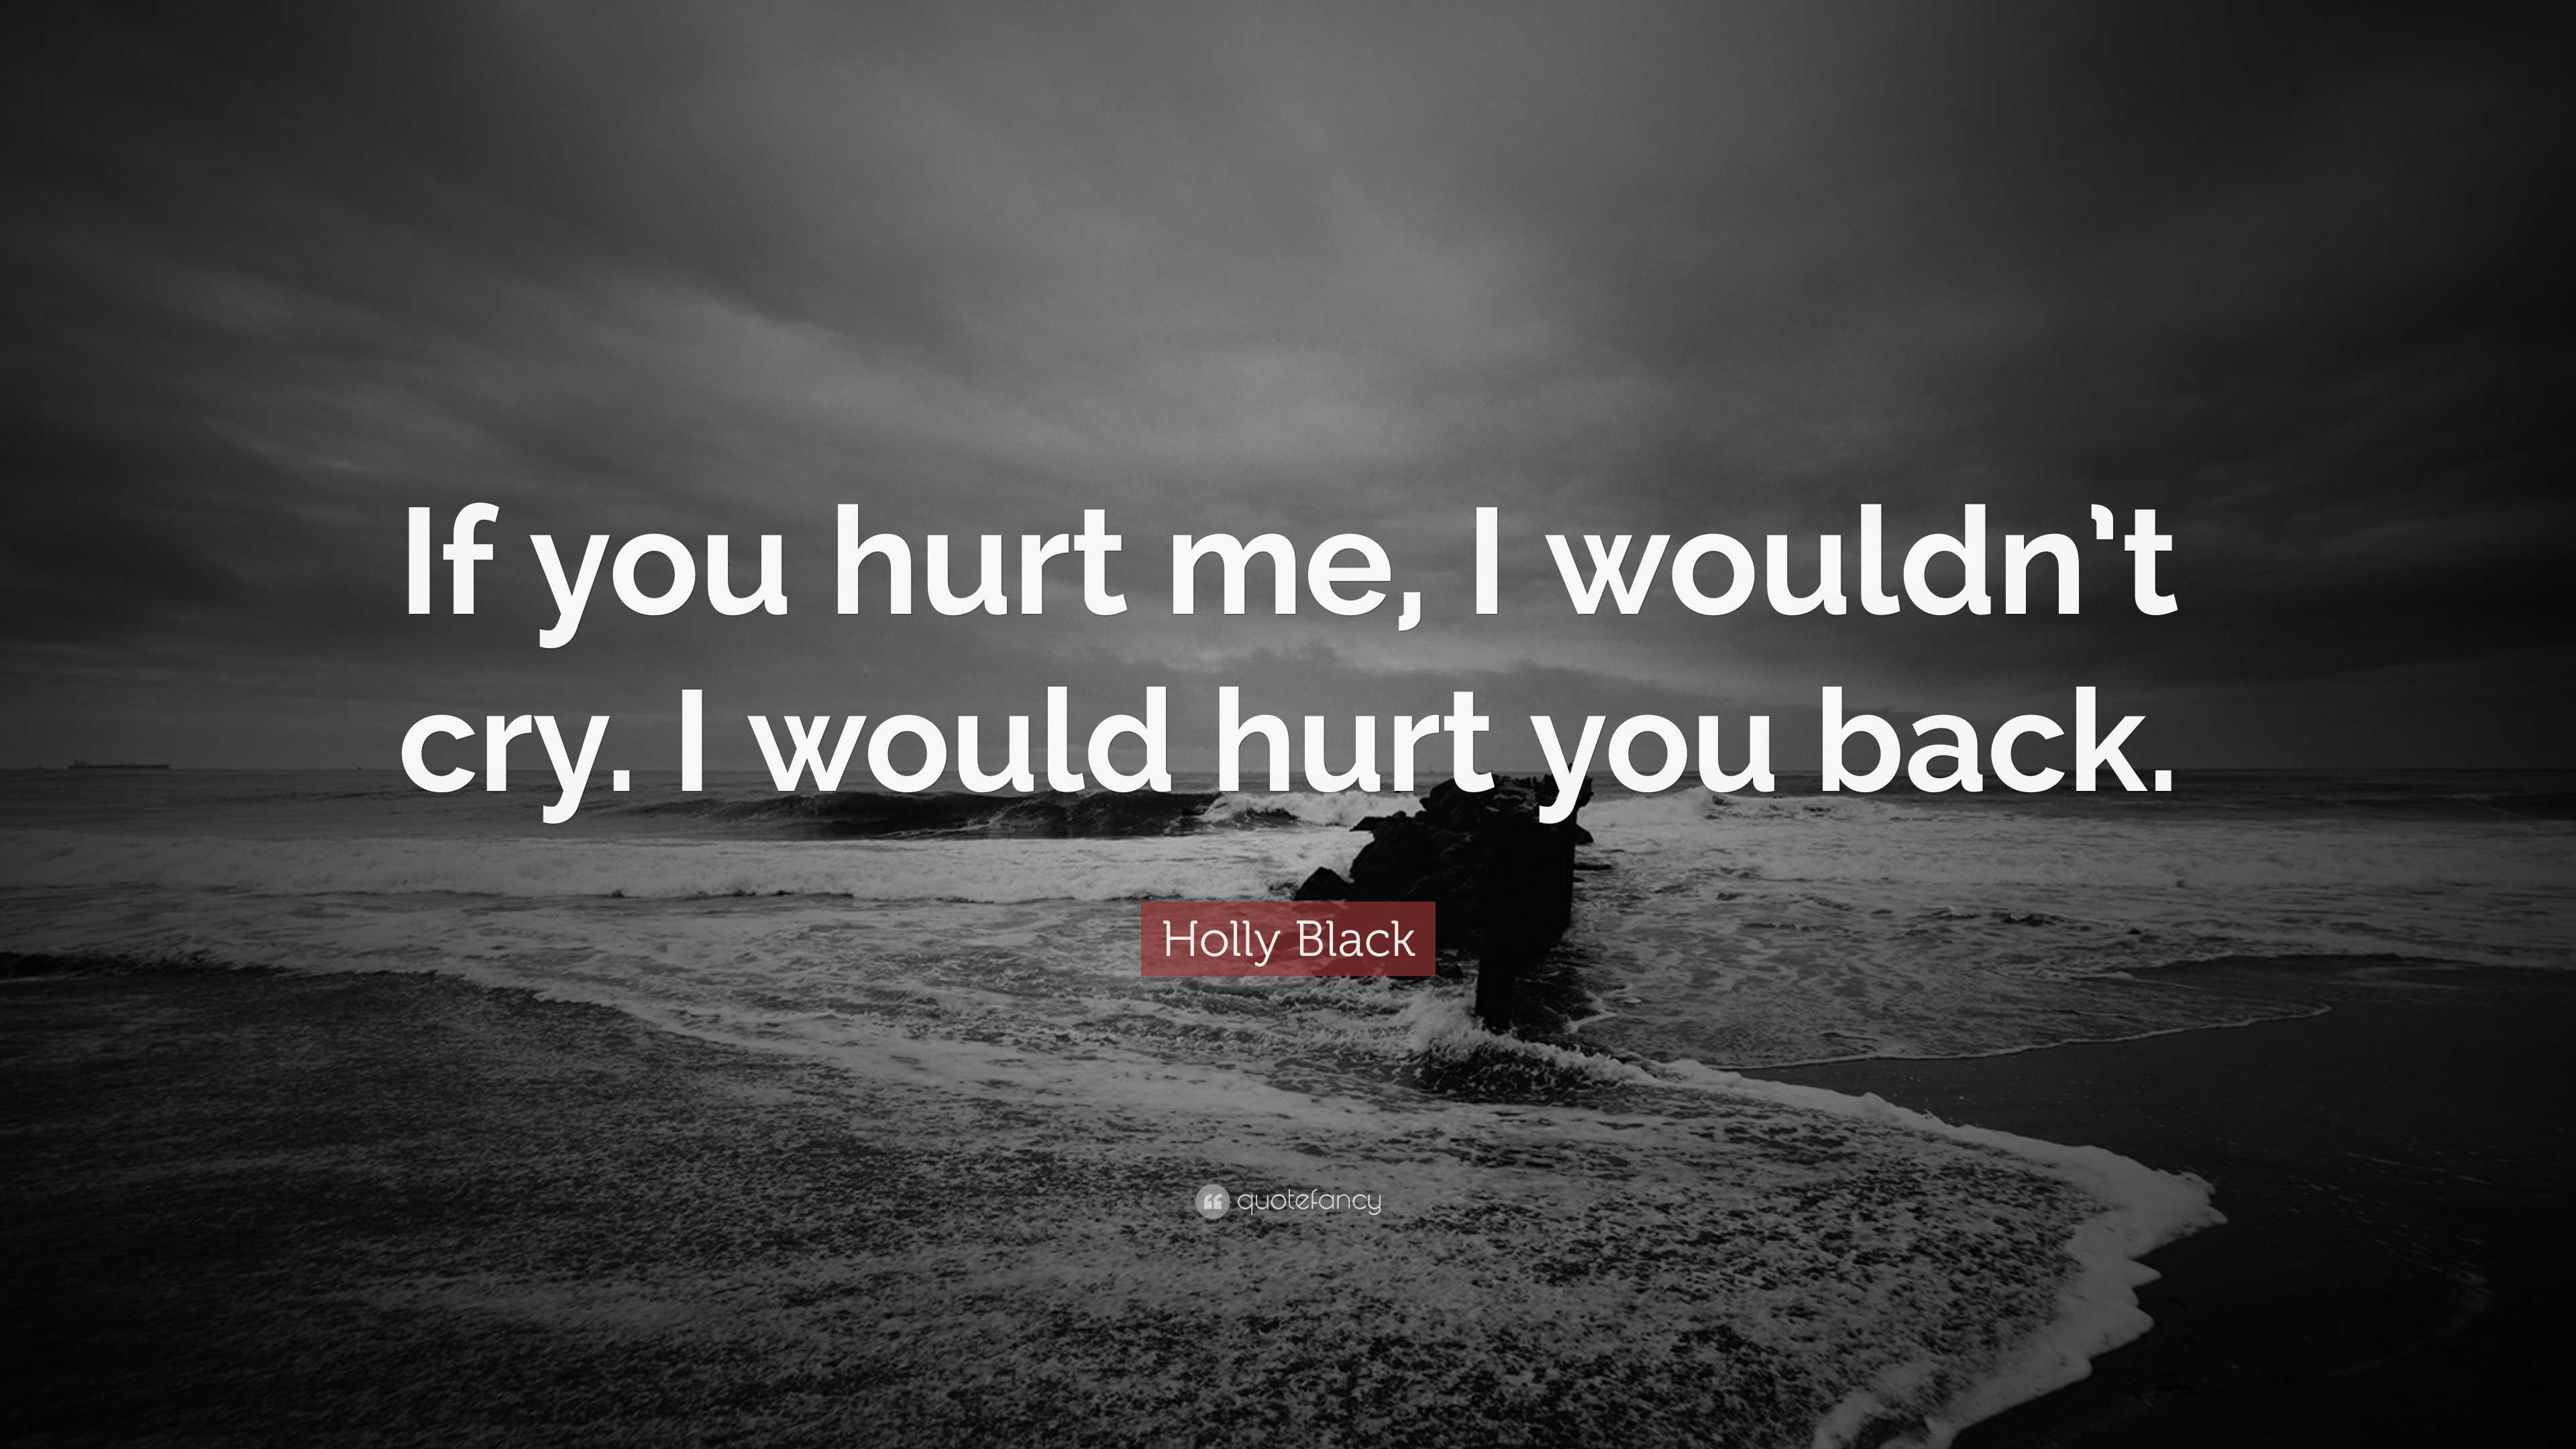 No Matter How Much You Hurt Me! - Mobile Love Wallpaper | Mobile Wallpapers  | Download Free Android, iPhone, Samsung HD Backgrounds